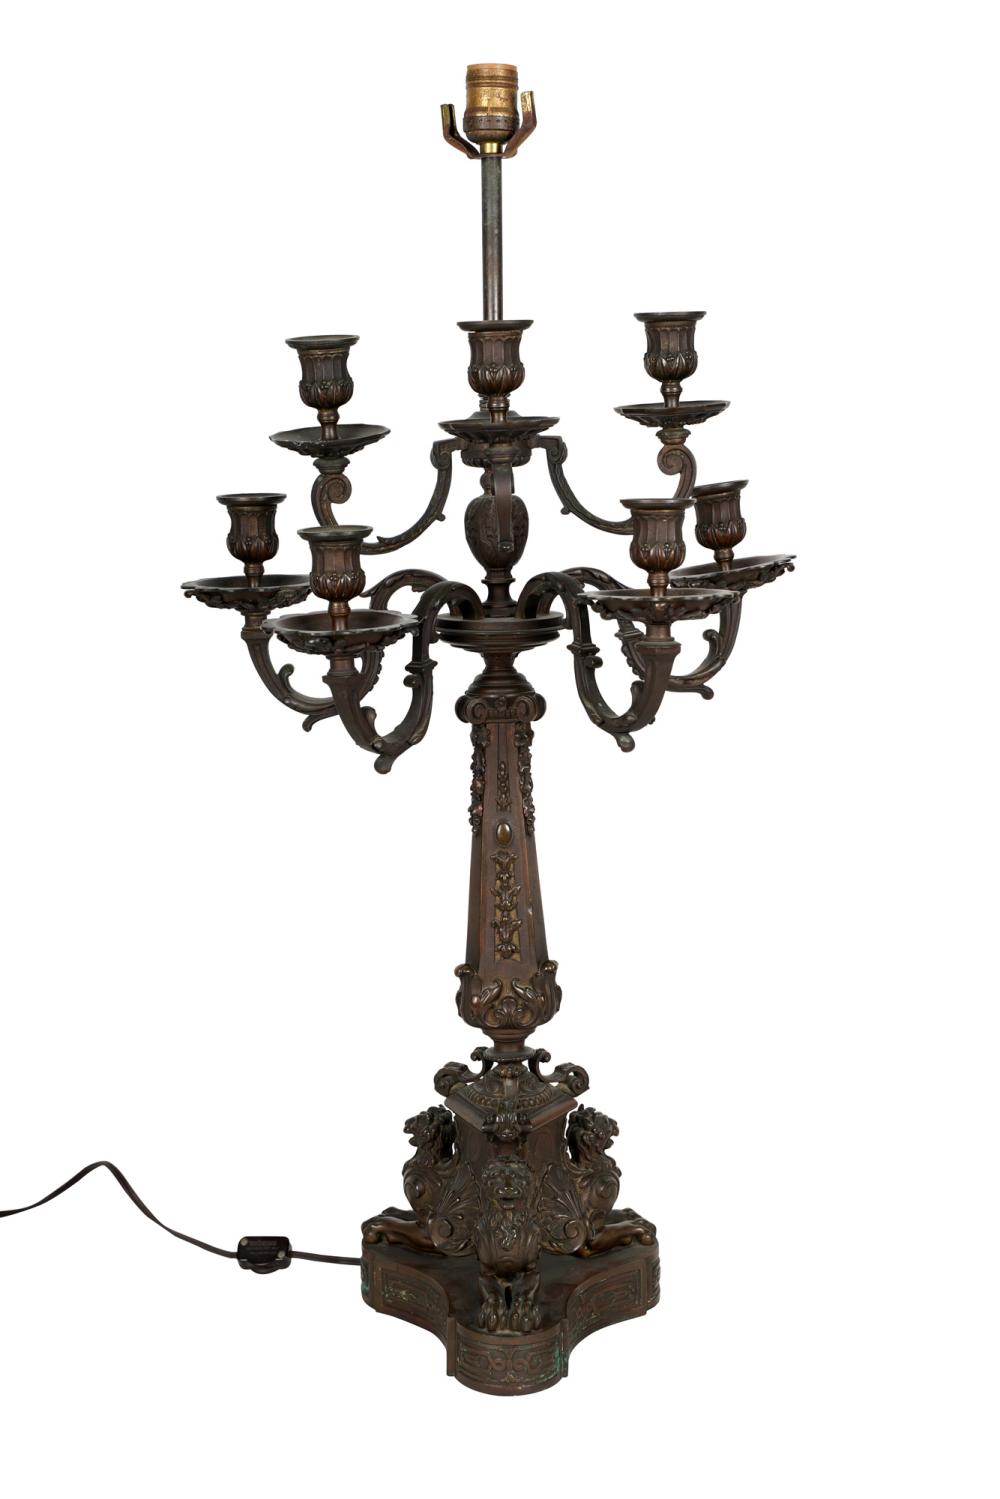 NEOCLASSIC STYLE BRONZE TABLE LAMP31 33632f